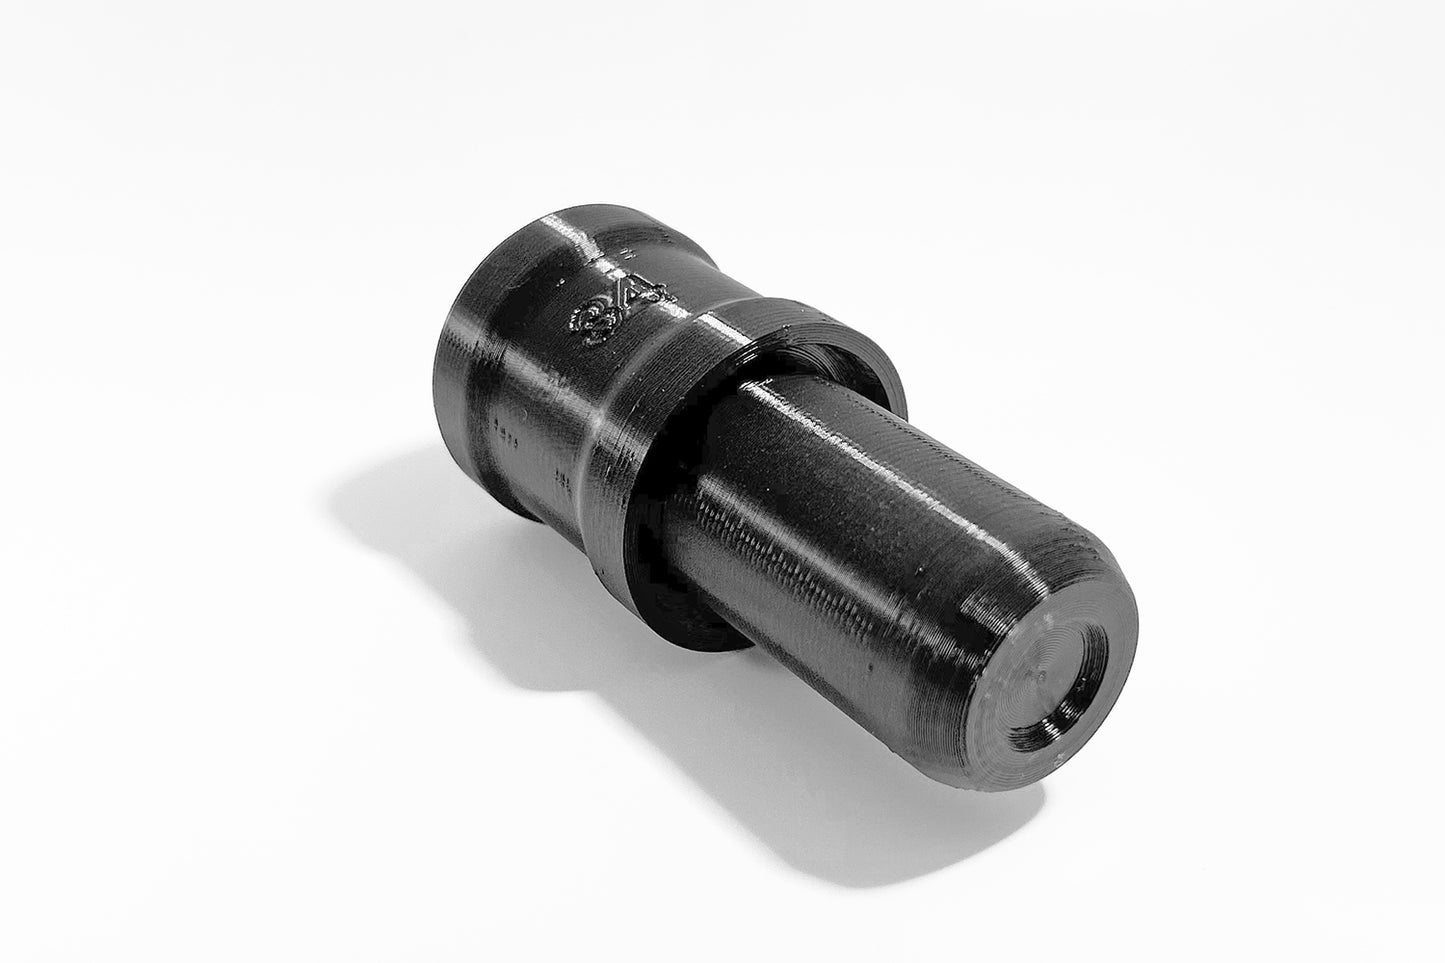 Bottom view of Momentum Cycle's Fork Seal Driver Tool. Quality 3D printed MTB tools for Home Mechanics, made in Canada.